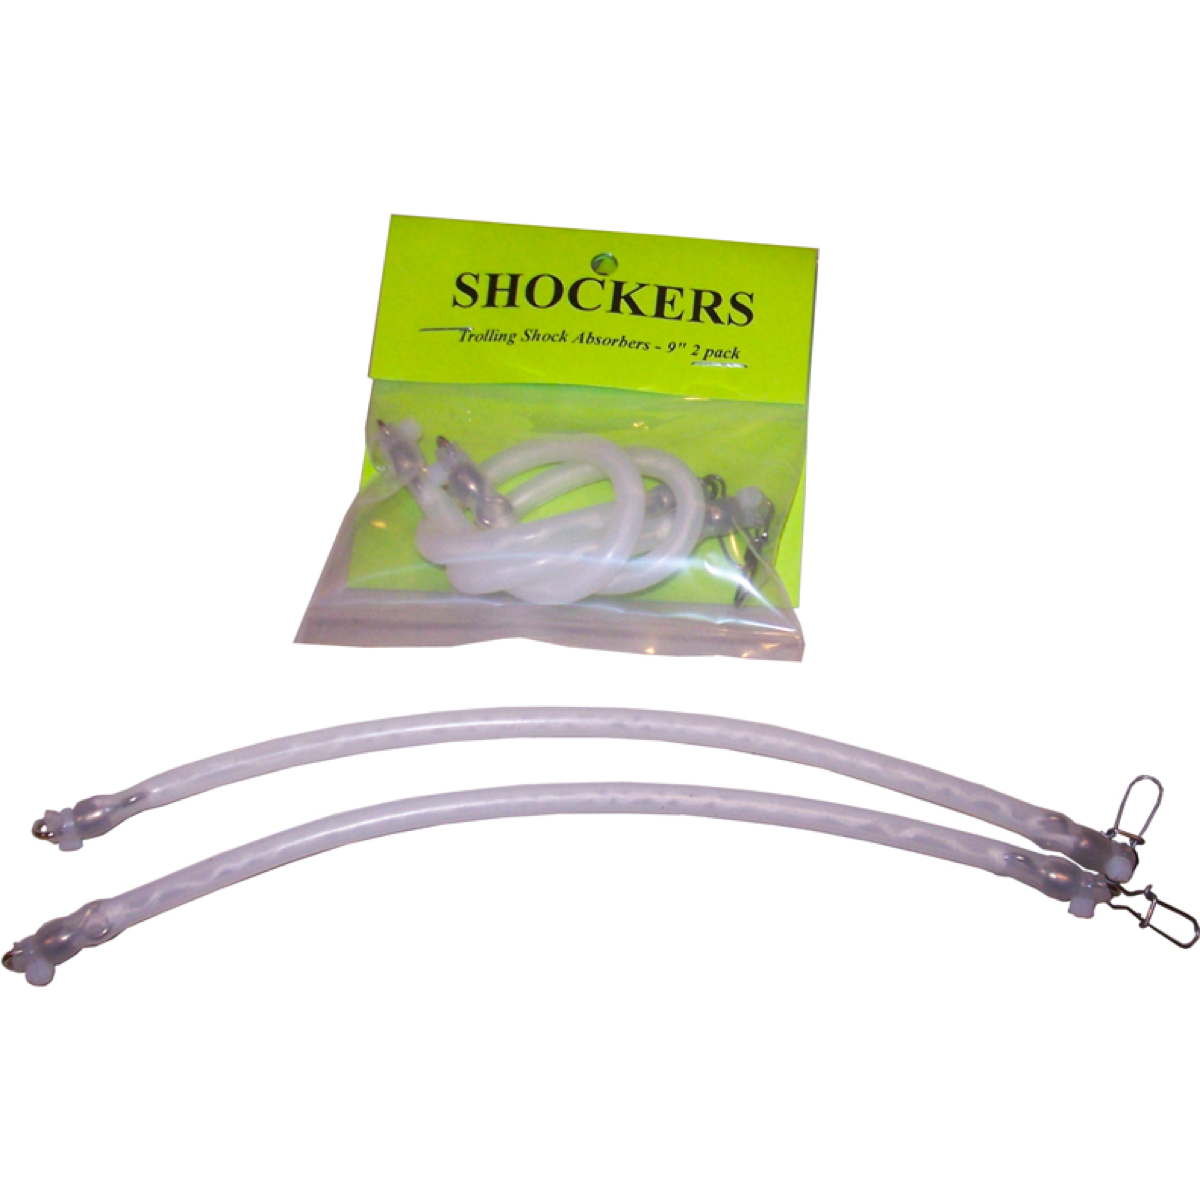 Photo of Amish Outfitters "Shockers" Snubbers for sale at United Tackle Shops.